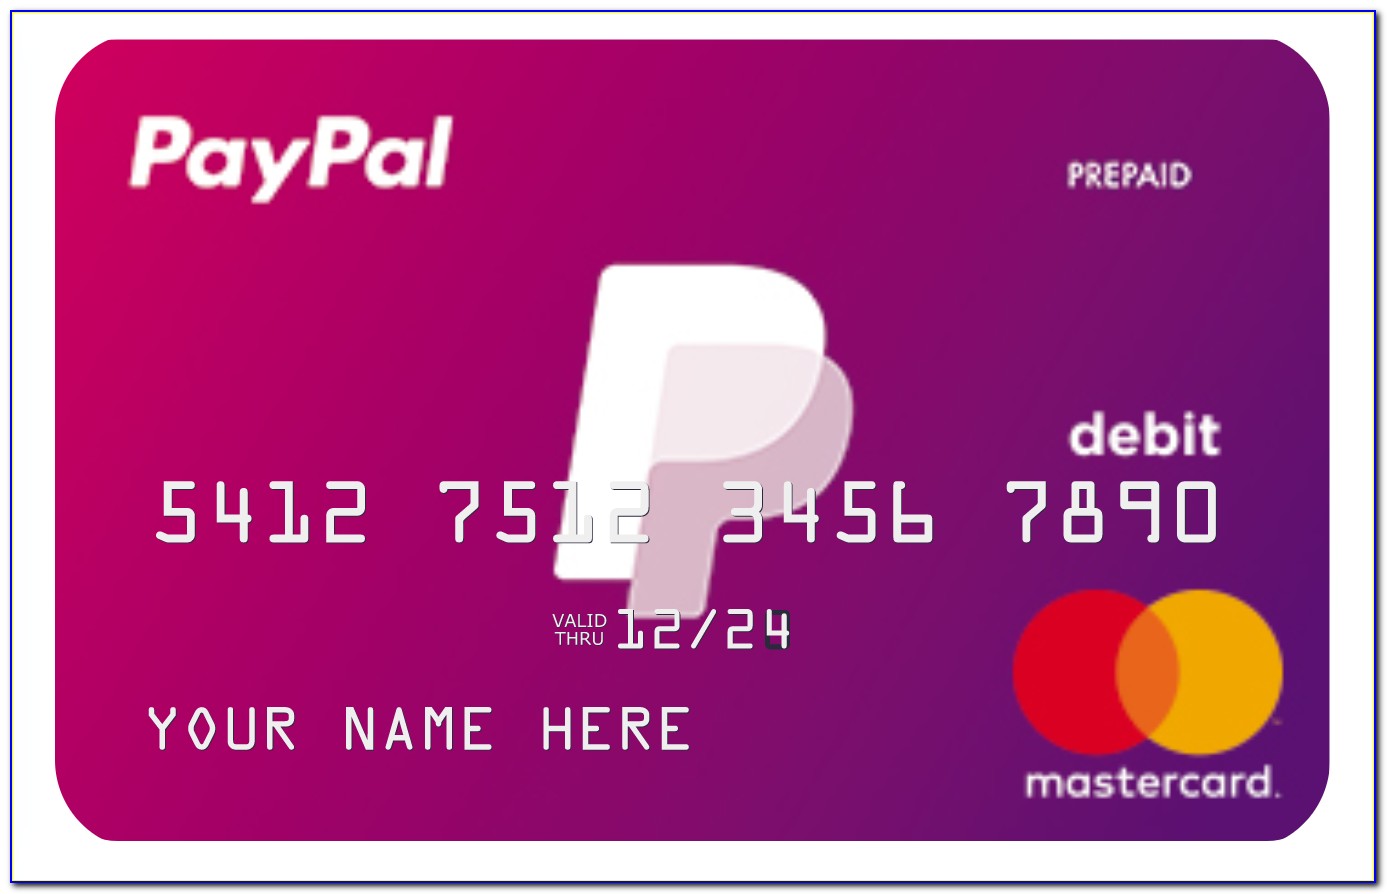 Does Paypal Business Debit Card Have A Routing Number